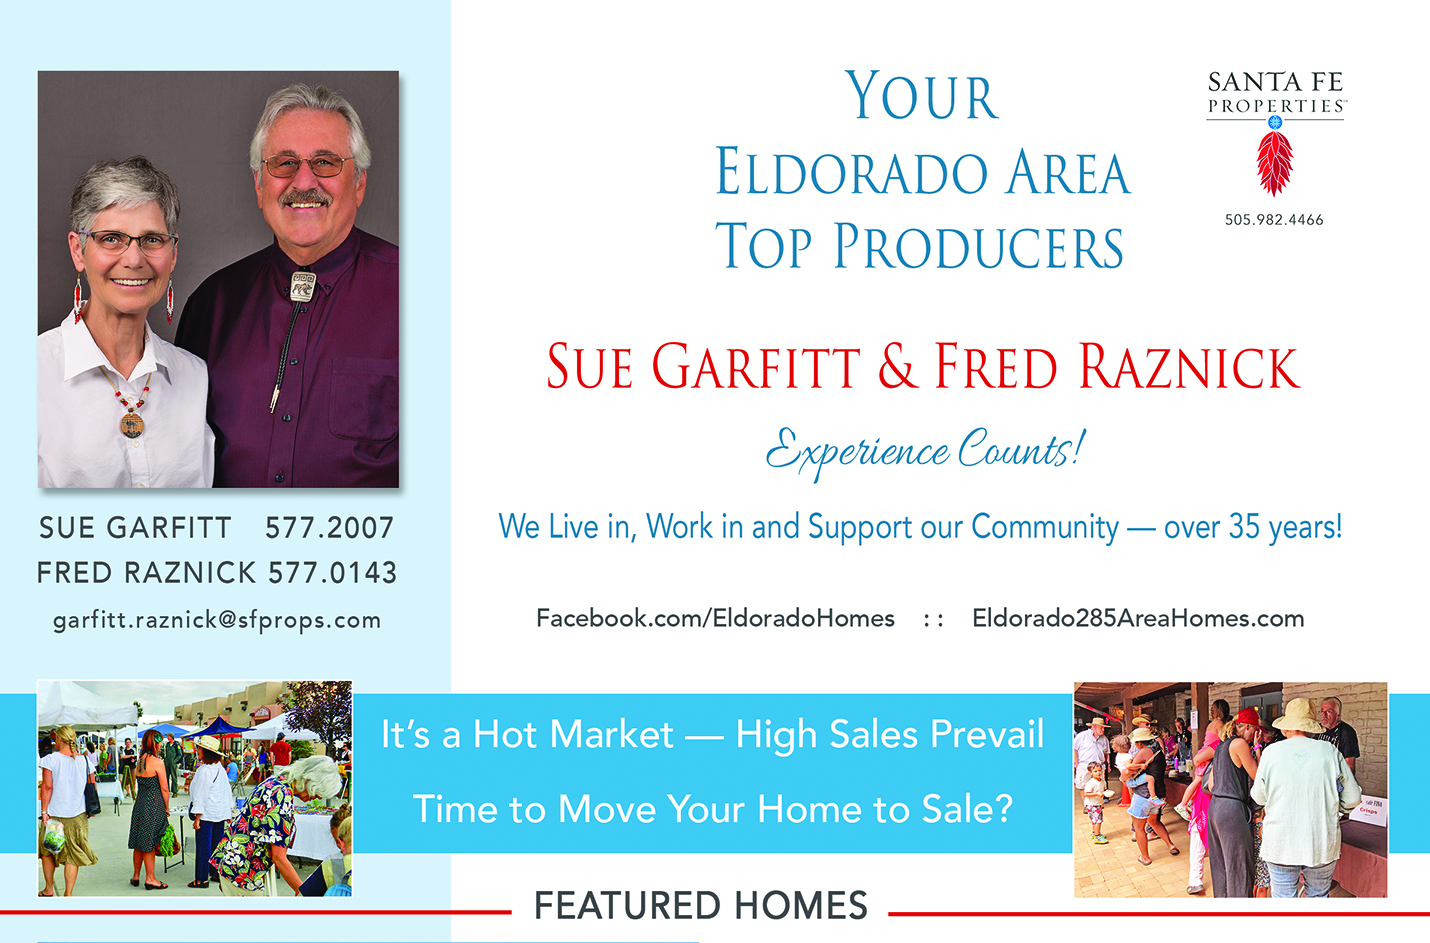 Look for our ad in the August issue of Eldorado Living